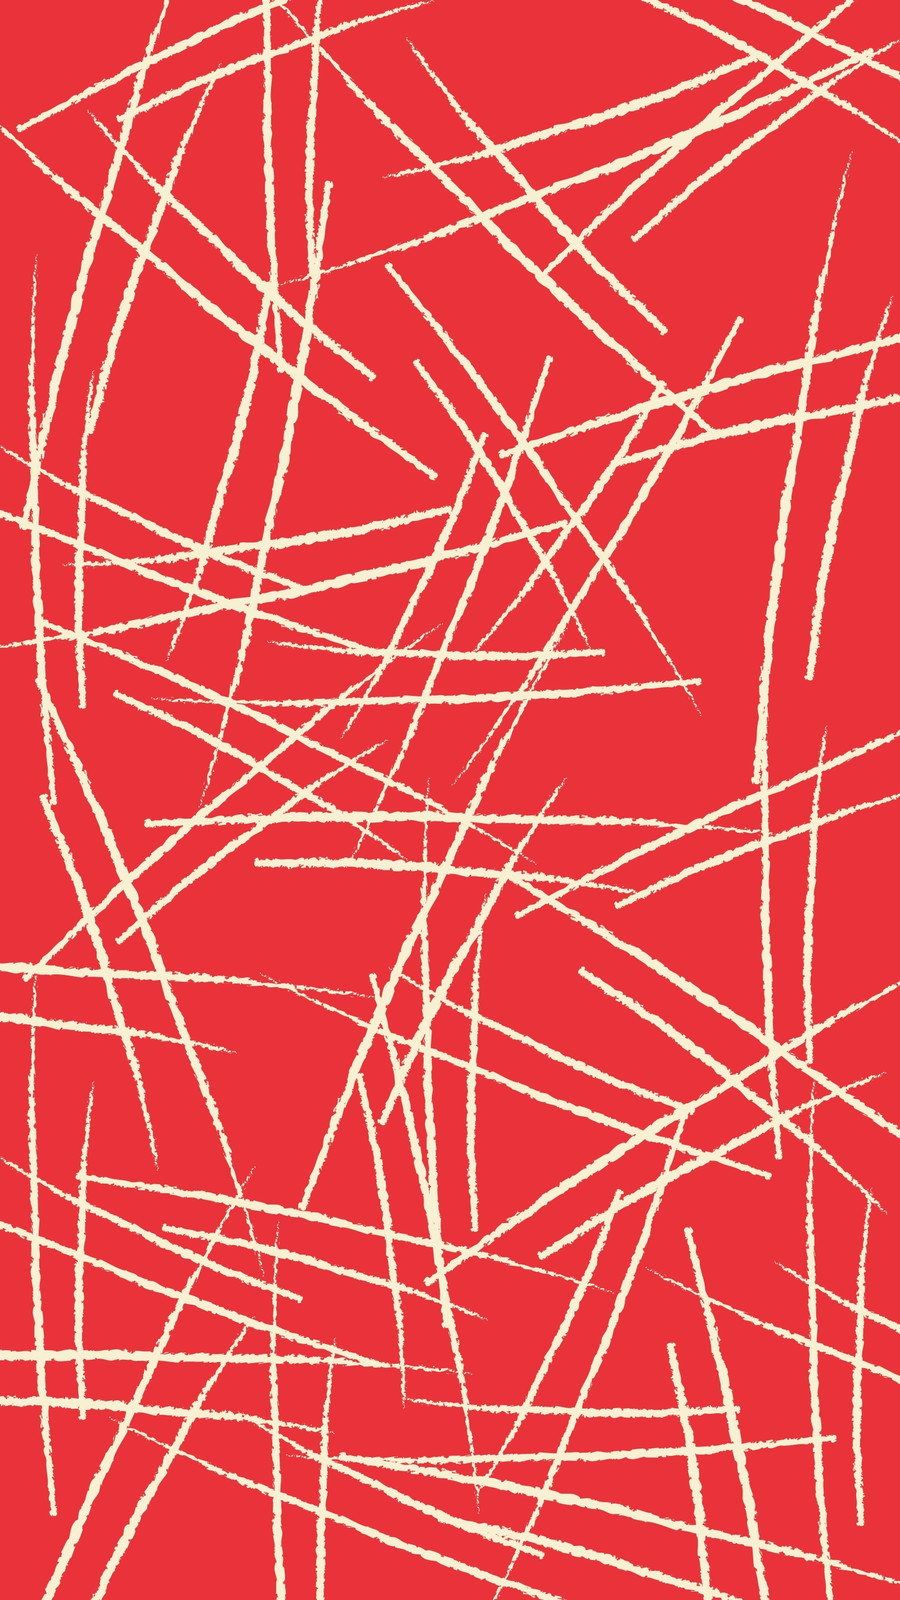 A red and white pattern with lines - Crimson